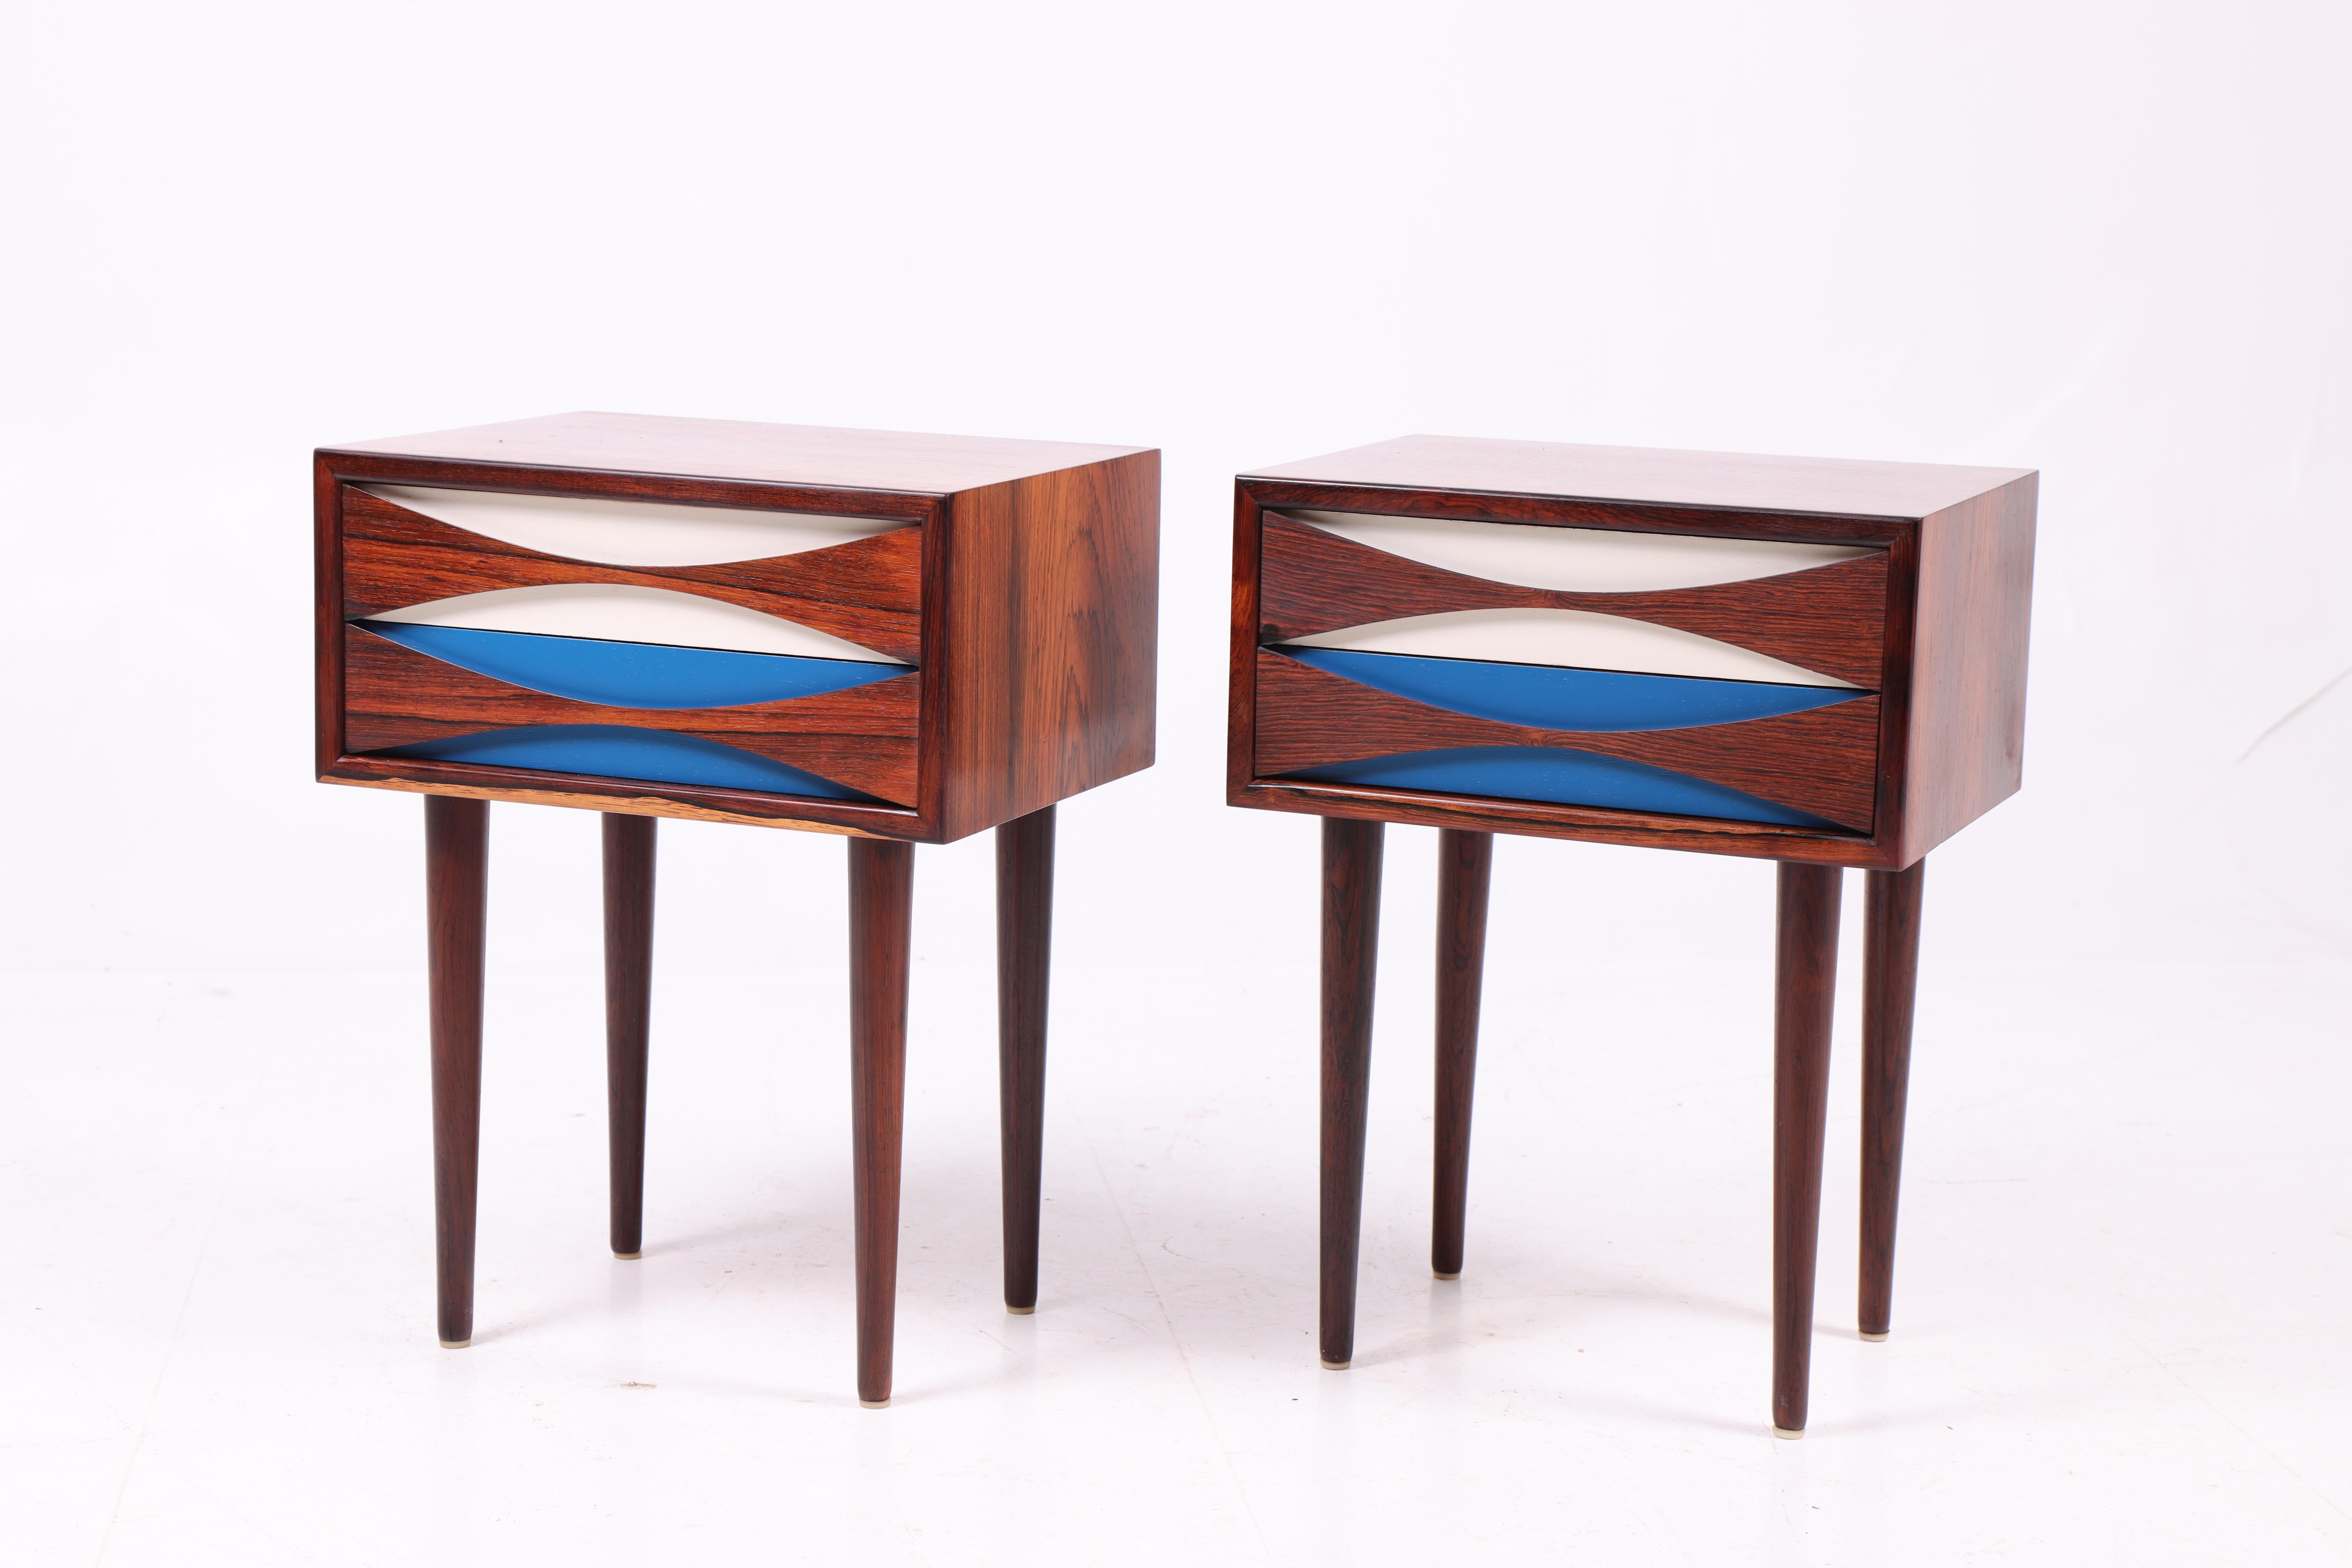 Danish Pair of Rare Midcentury Nightstands in Rosewood by Niels Clausen, 1960s For Sale